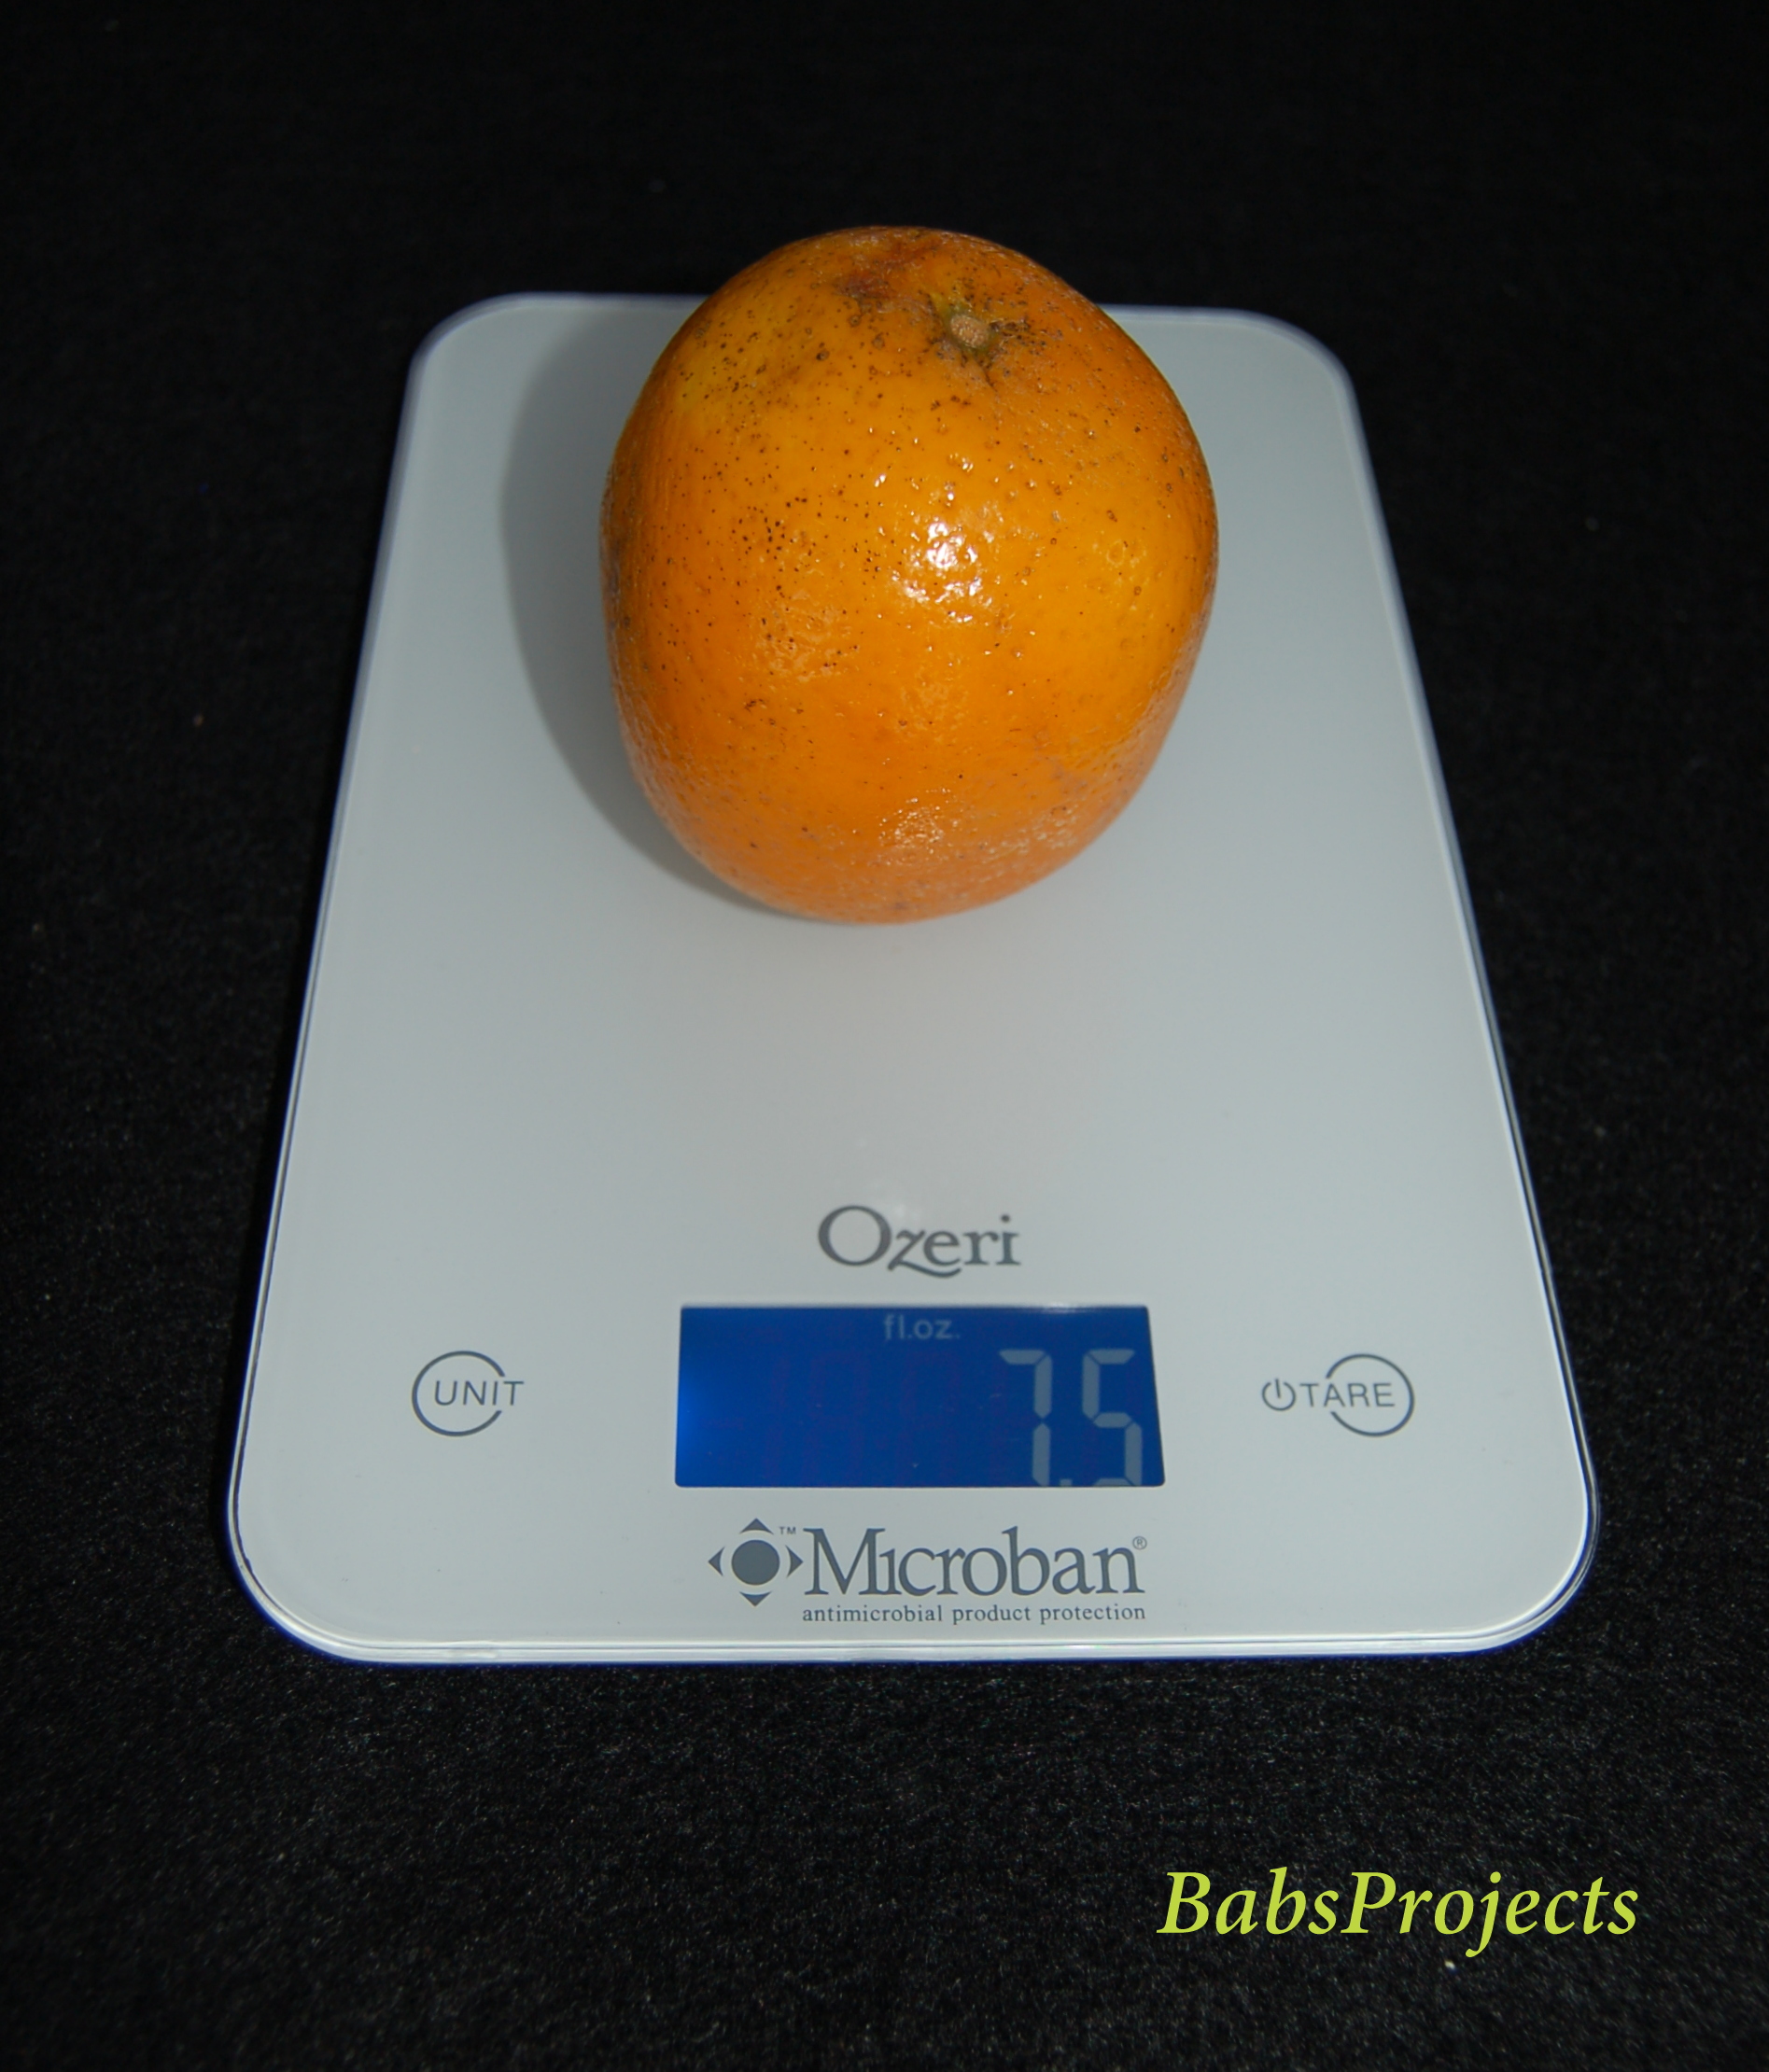  Ozeri Touch II Digital Kitchen Scale with Microban